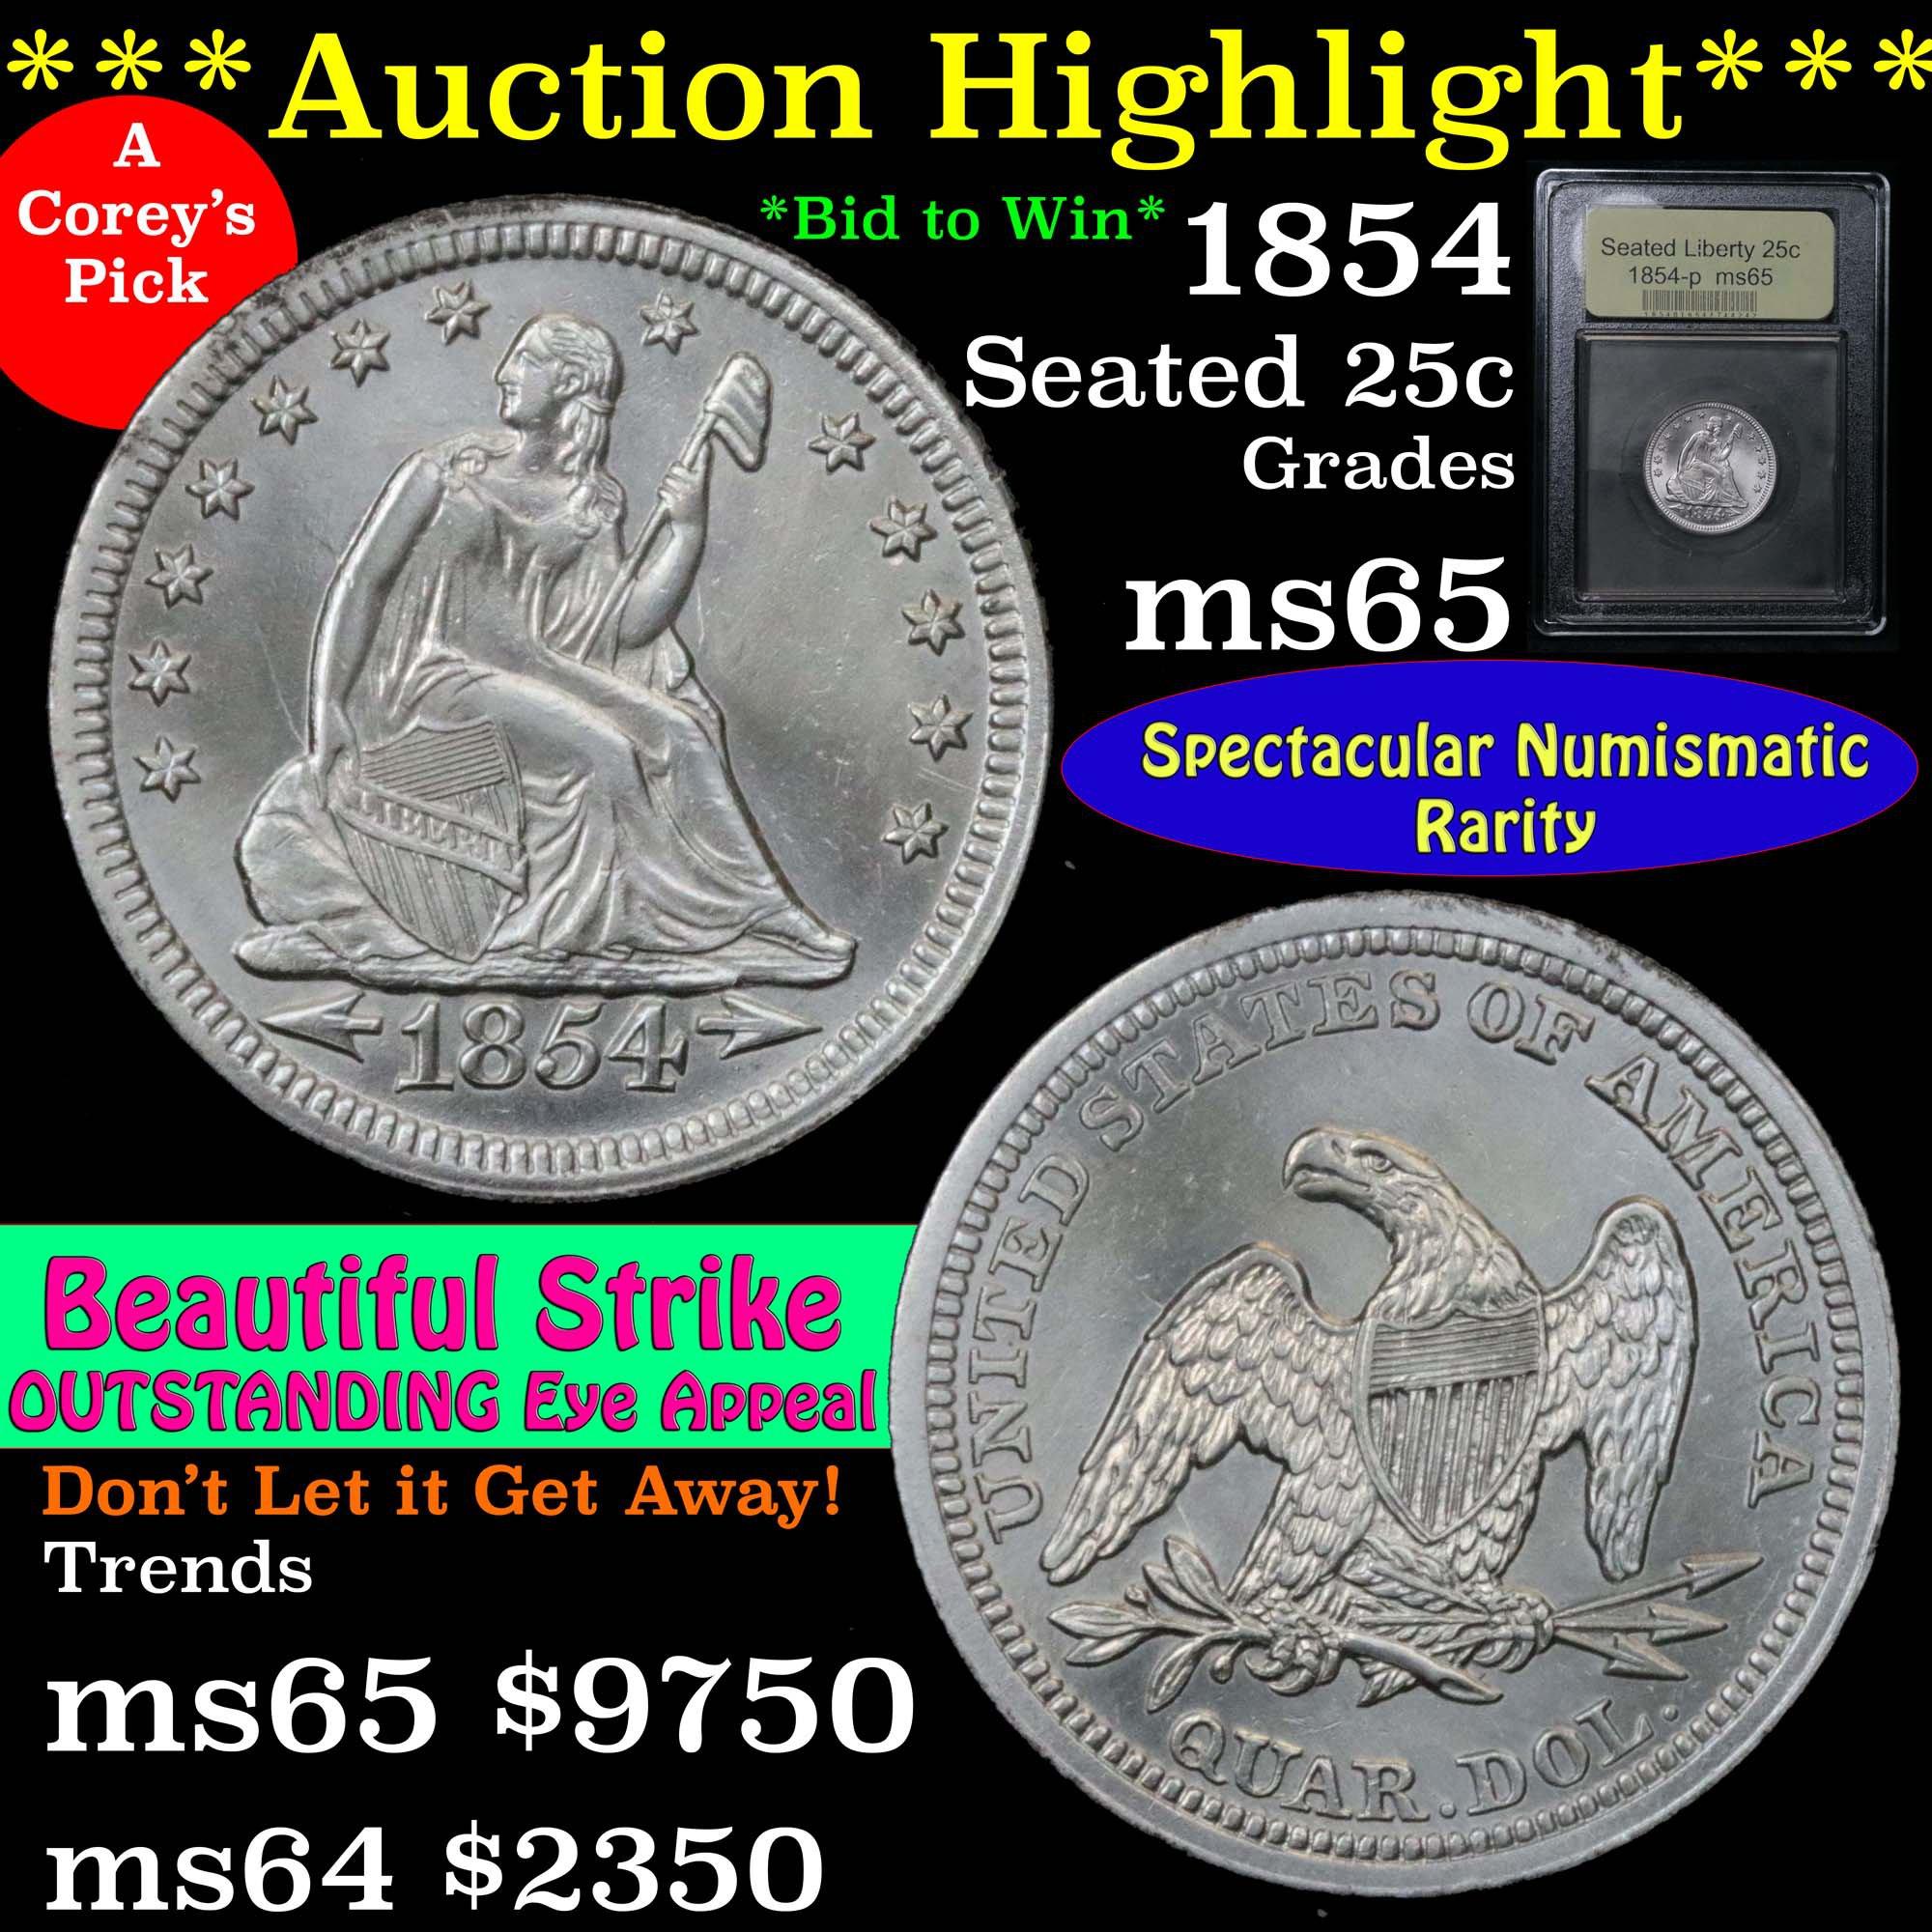 ***Auction Highlight*** 1854-p Seated Liberty Quarter 25c Graded GEM Unc by USCG Superb coin (fc)